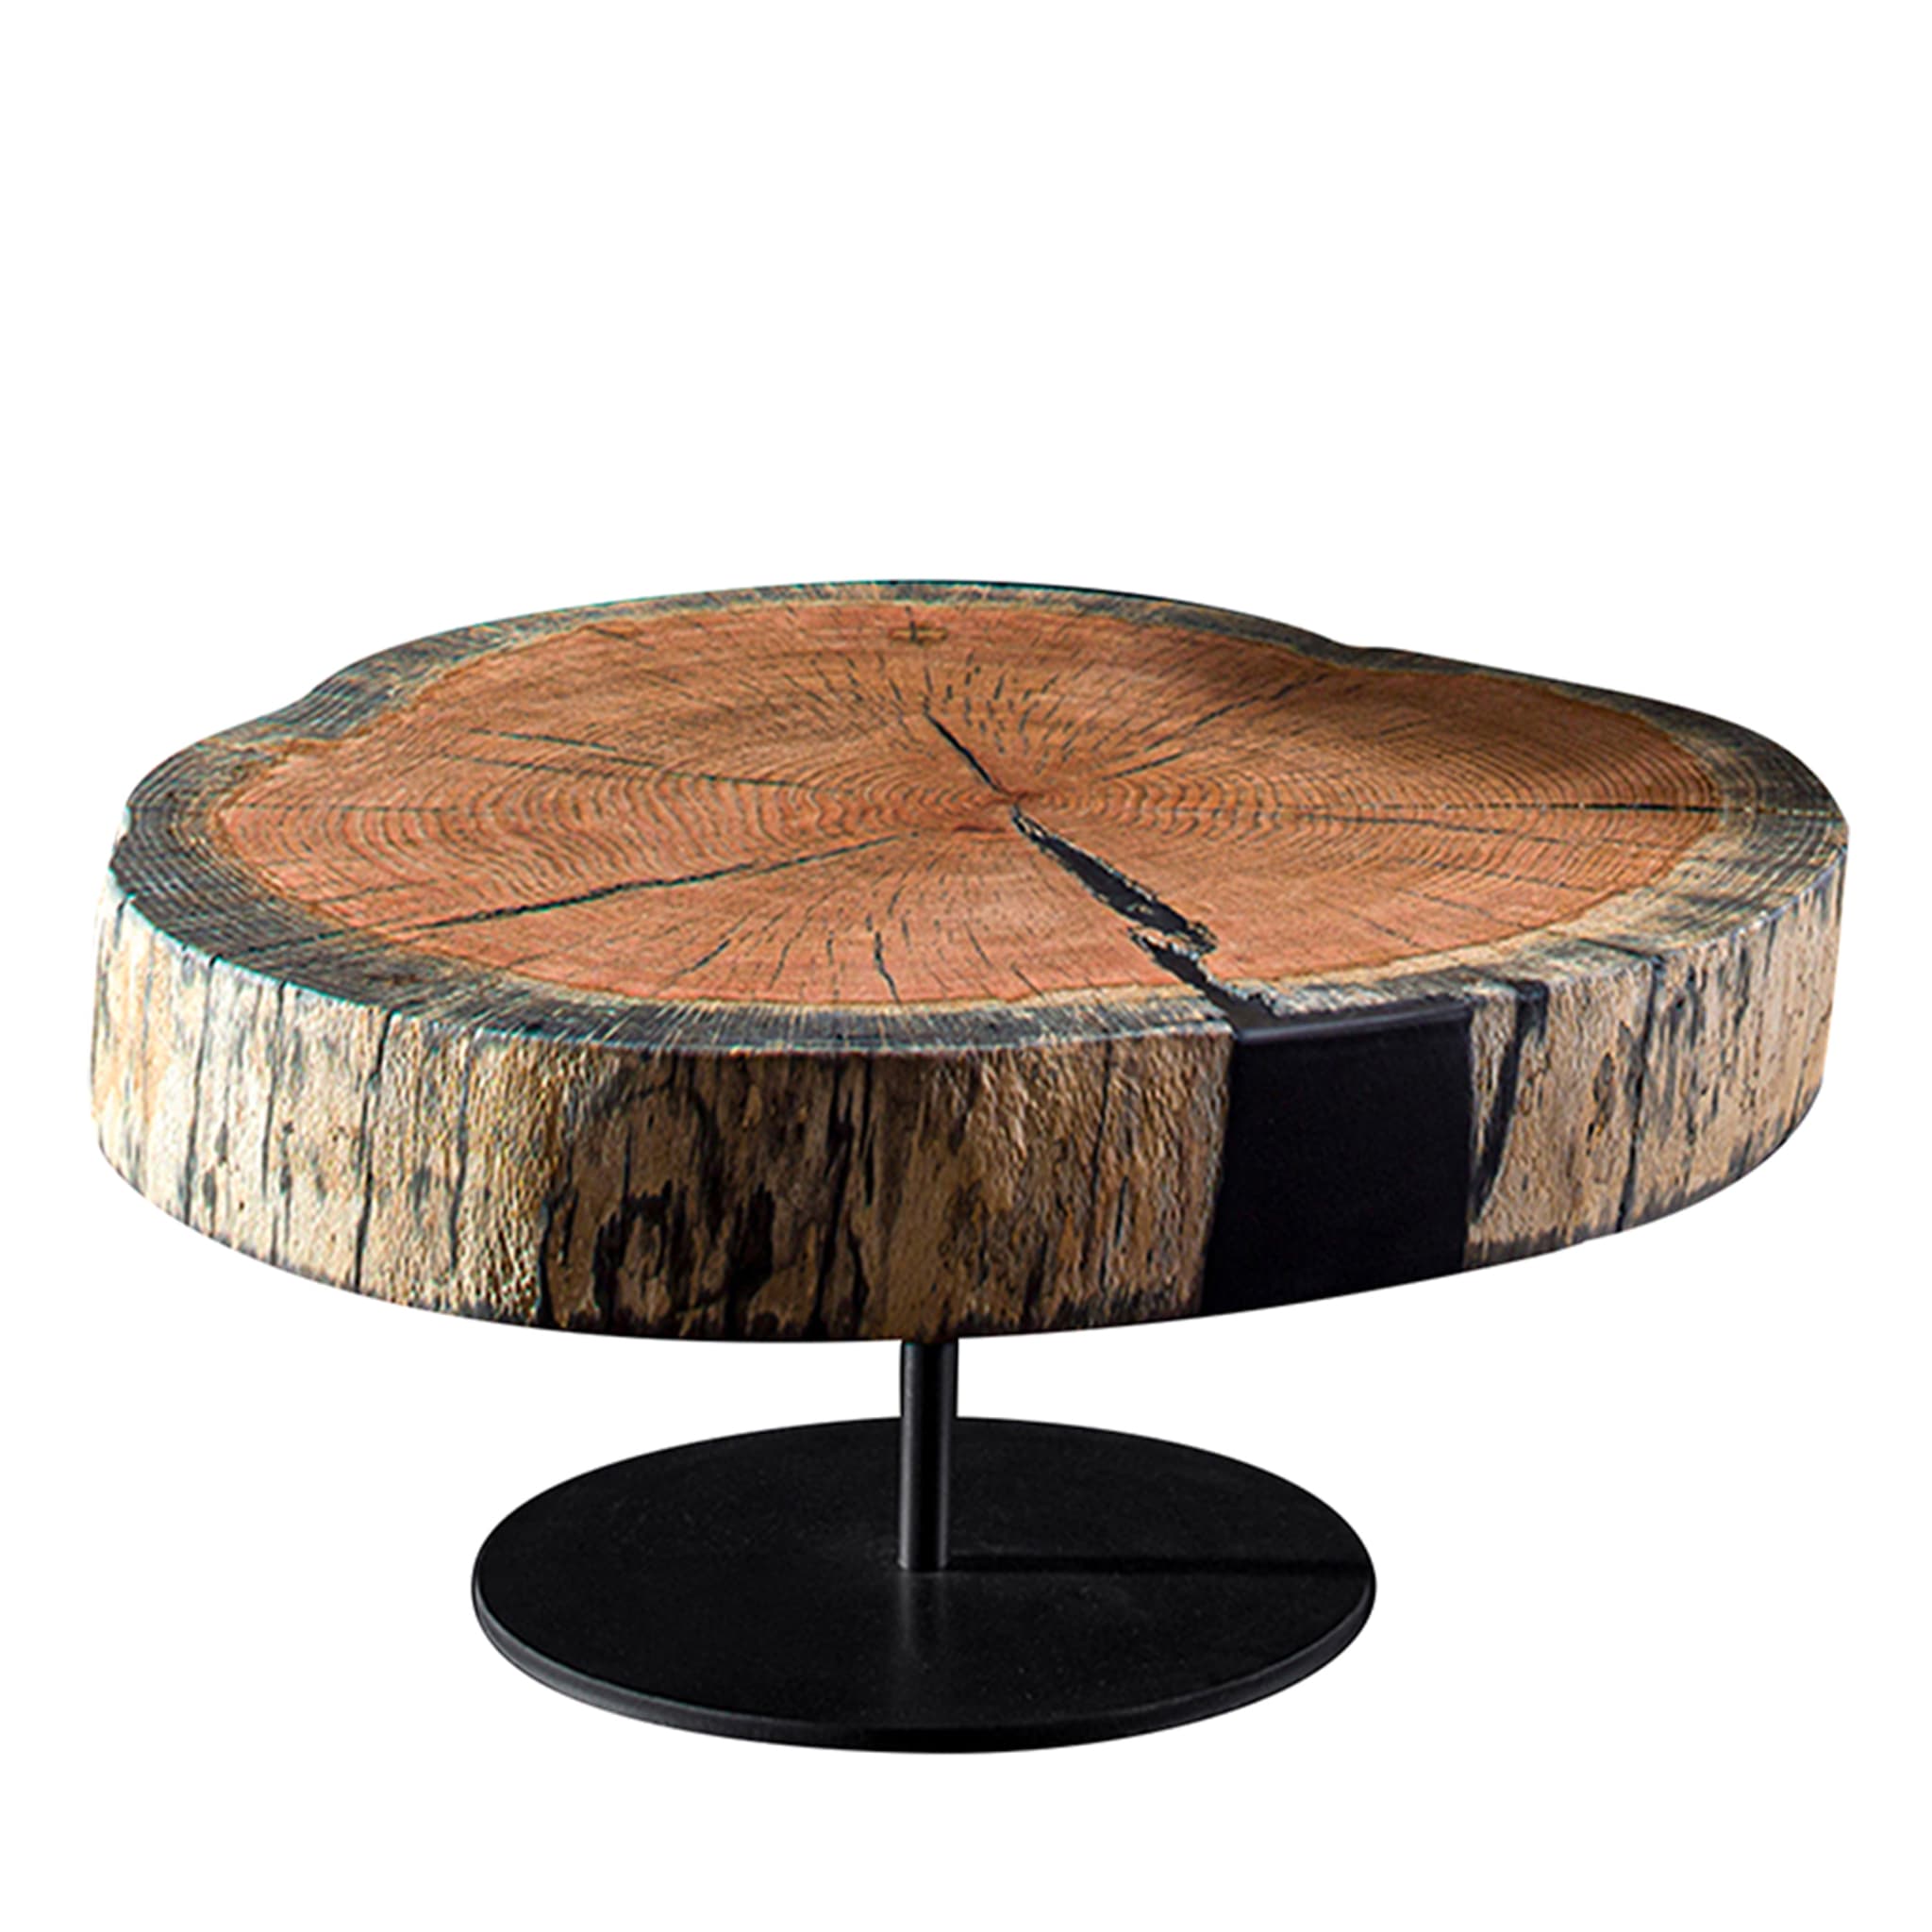 Round Oak coffee table #2 - Main view